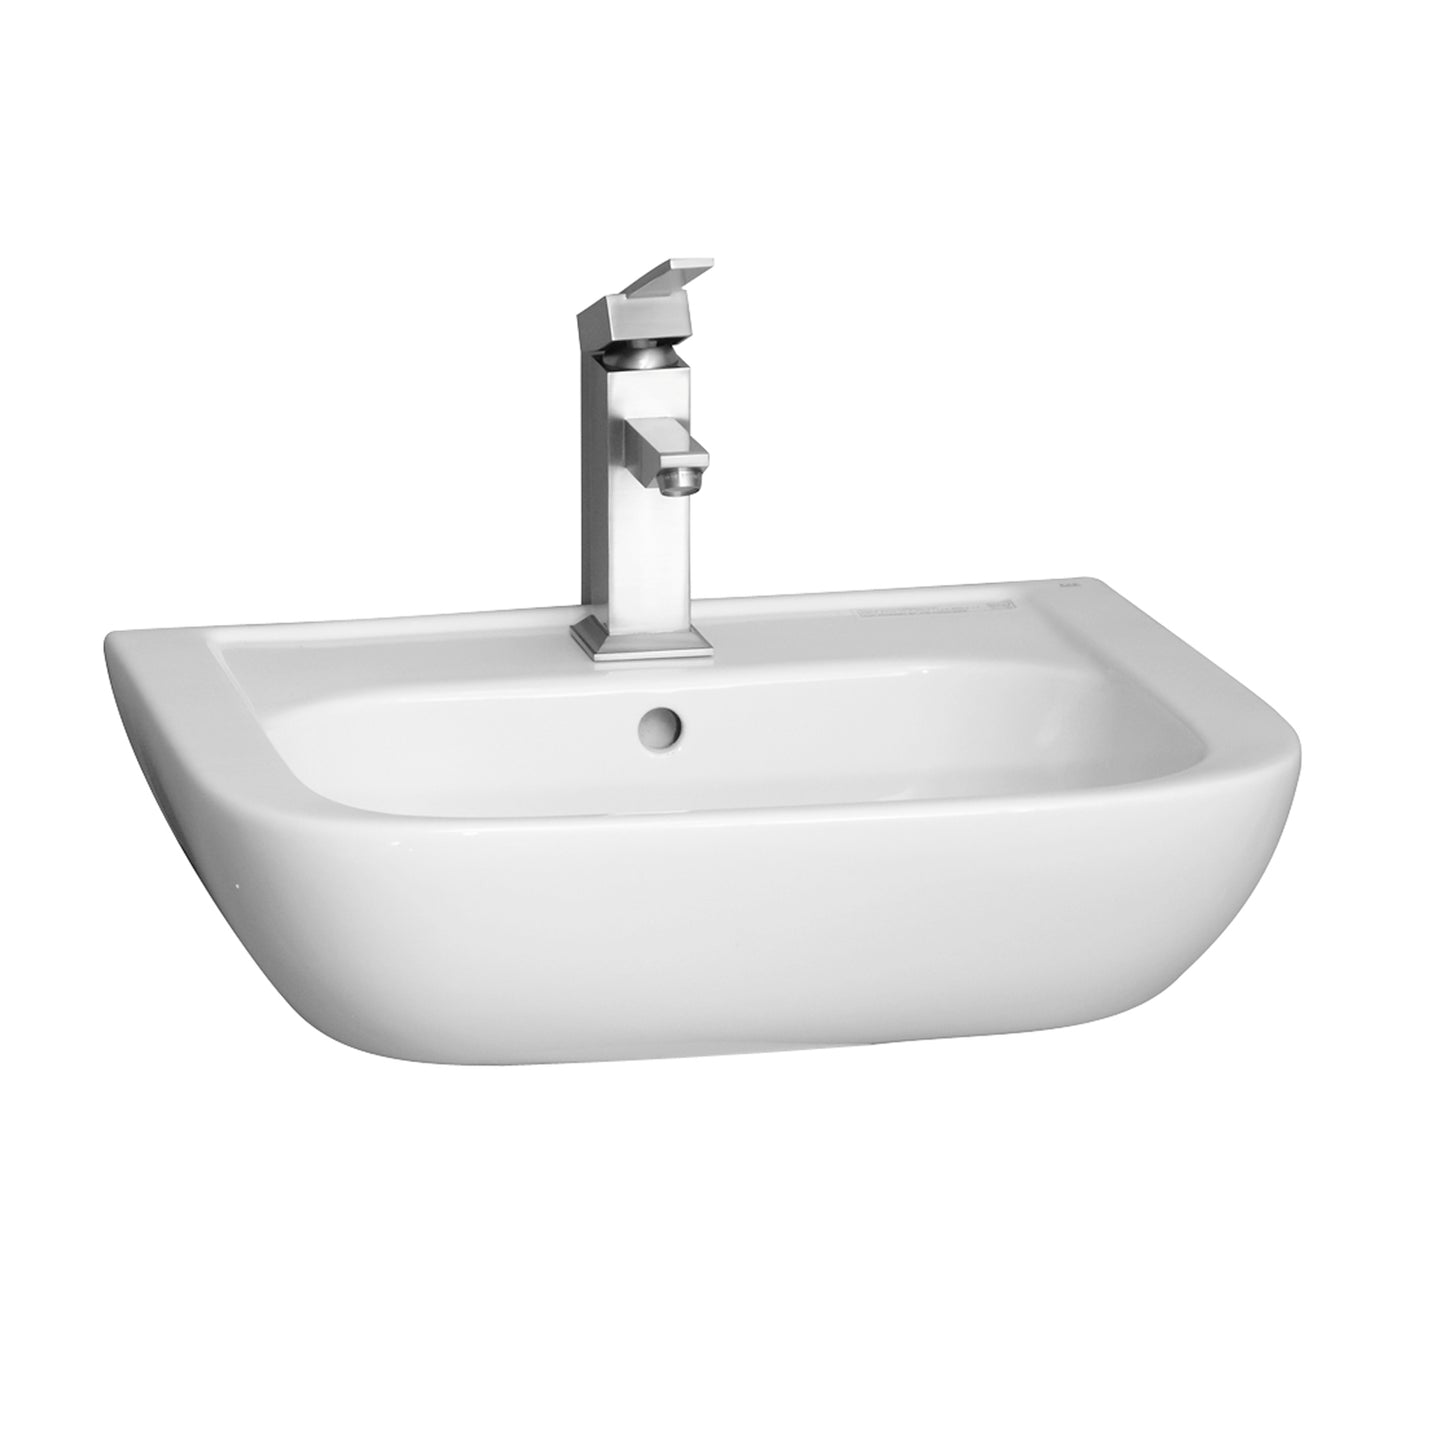 Caroline 450 Wall Hung Bathroom Sink White with 1 Faucet Hole